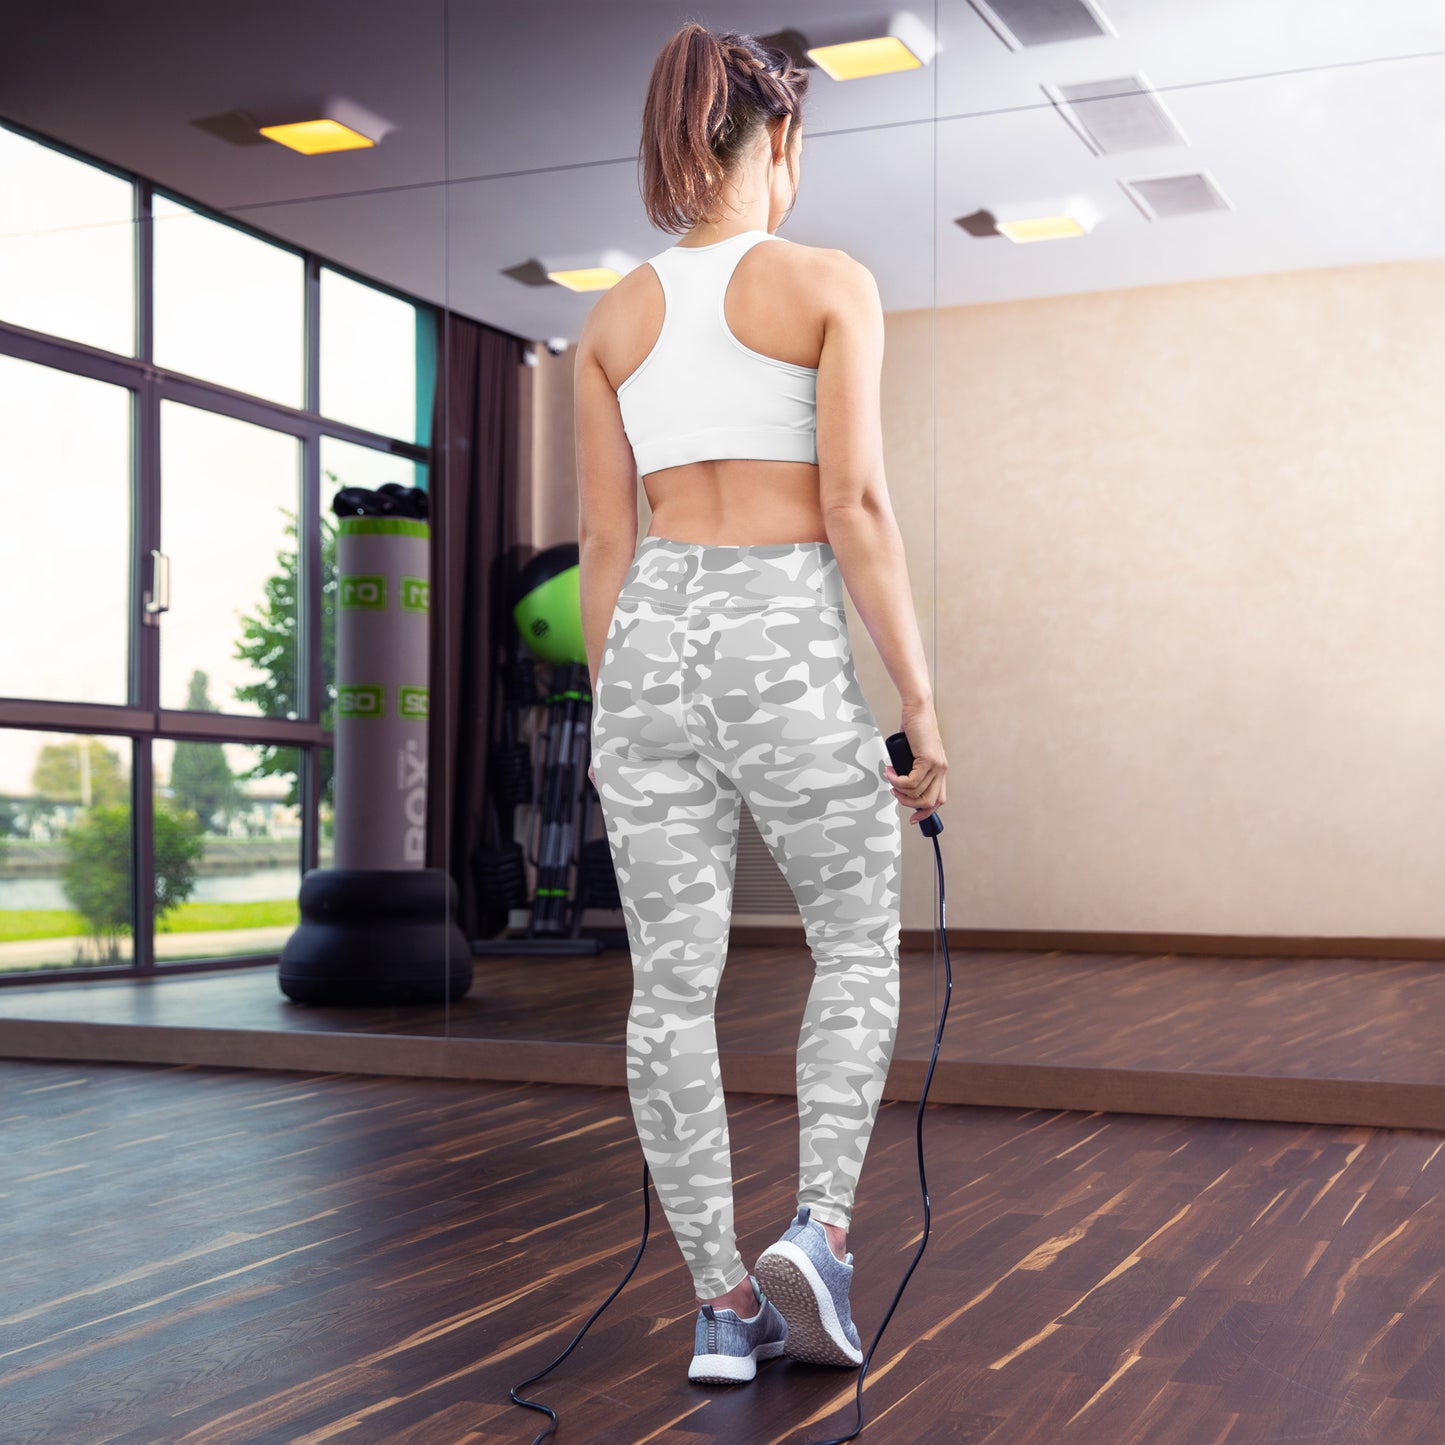 White Camo Yoga Leggings Women, Camouflage High Waisted Pants Cute Printed Workout Running Gym Designer Tights